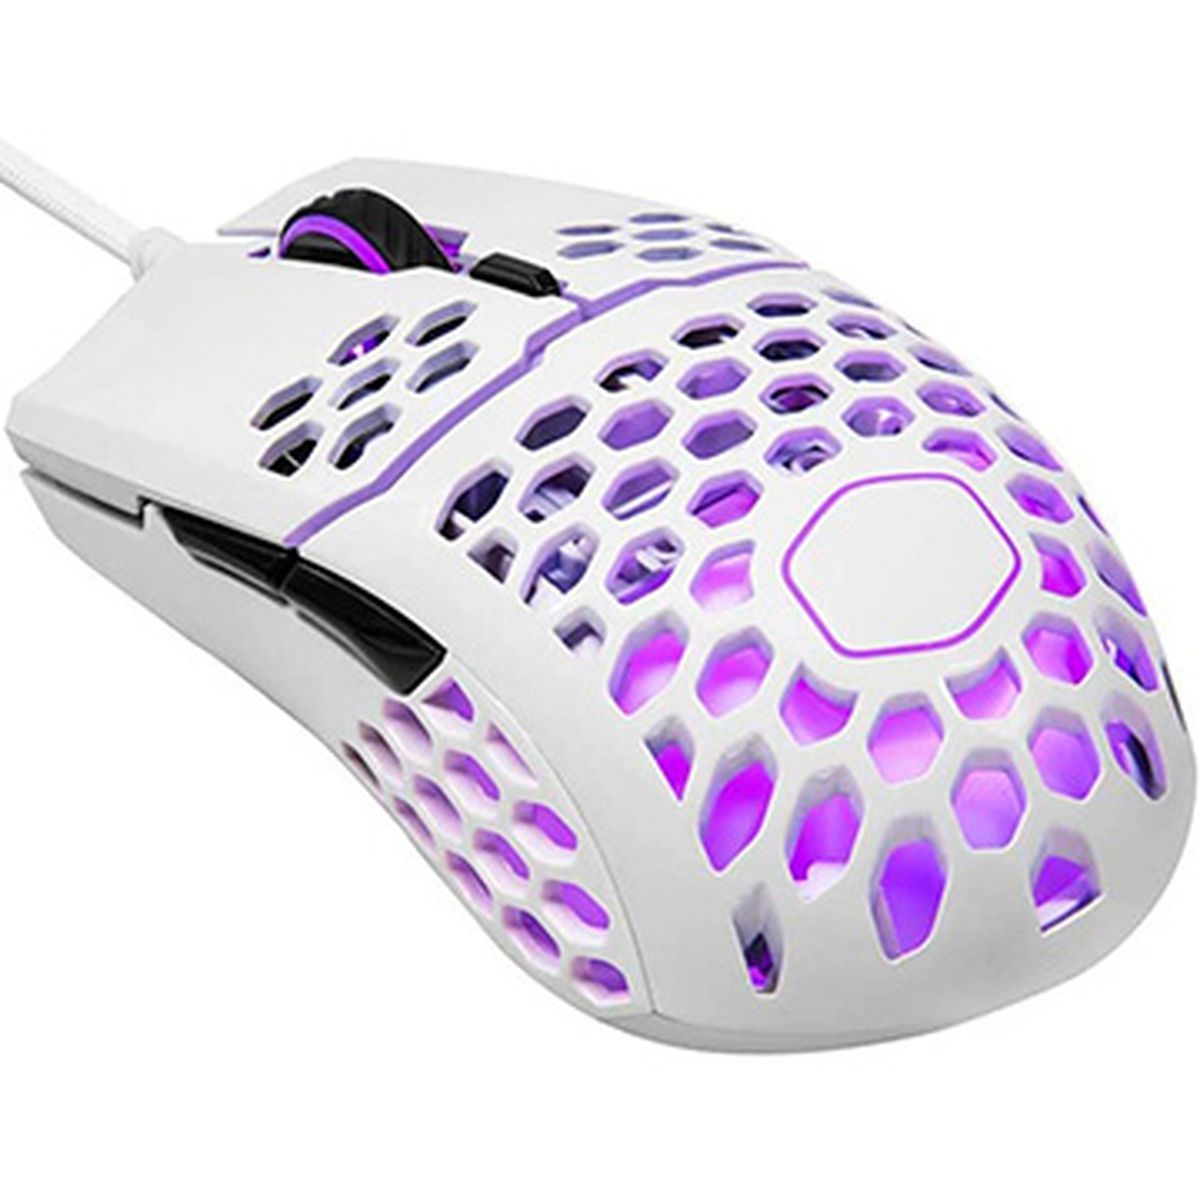 MasterMouse MM711 White Glossy